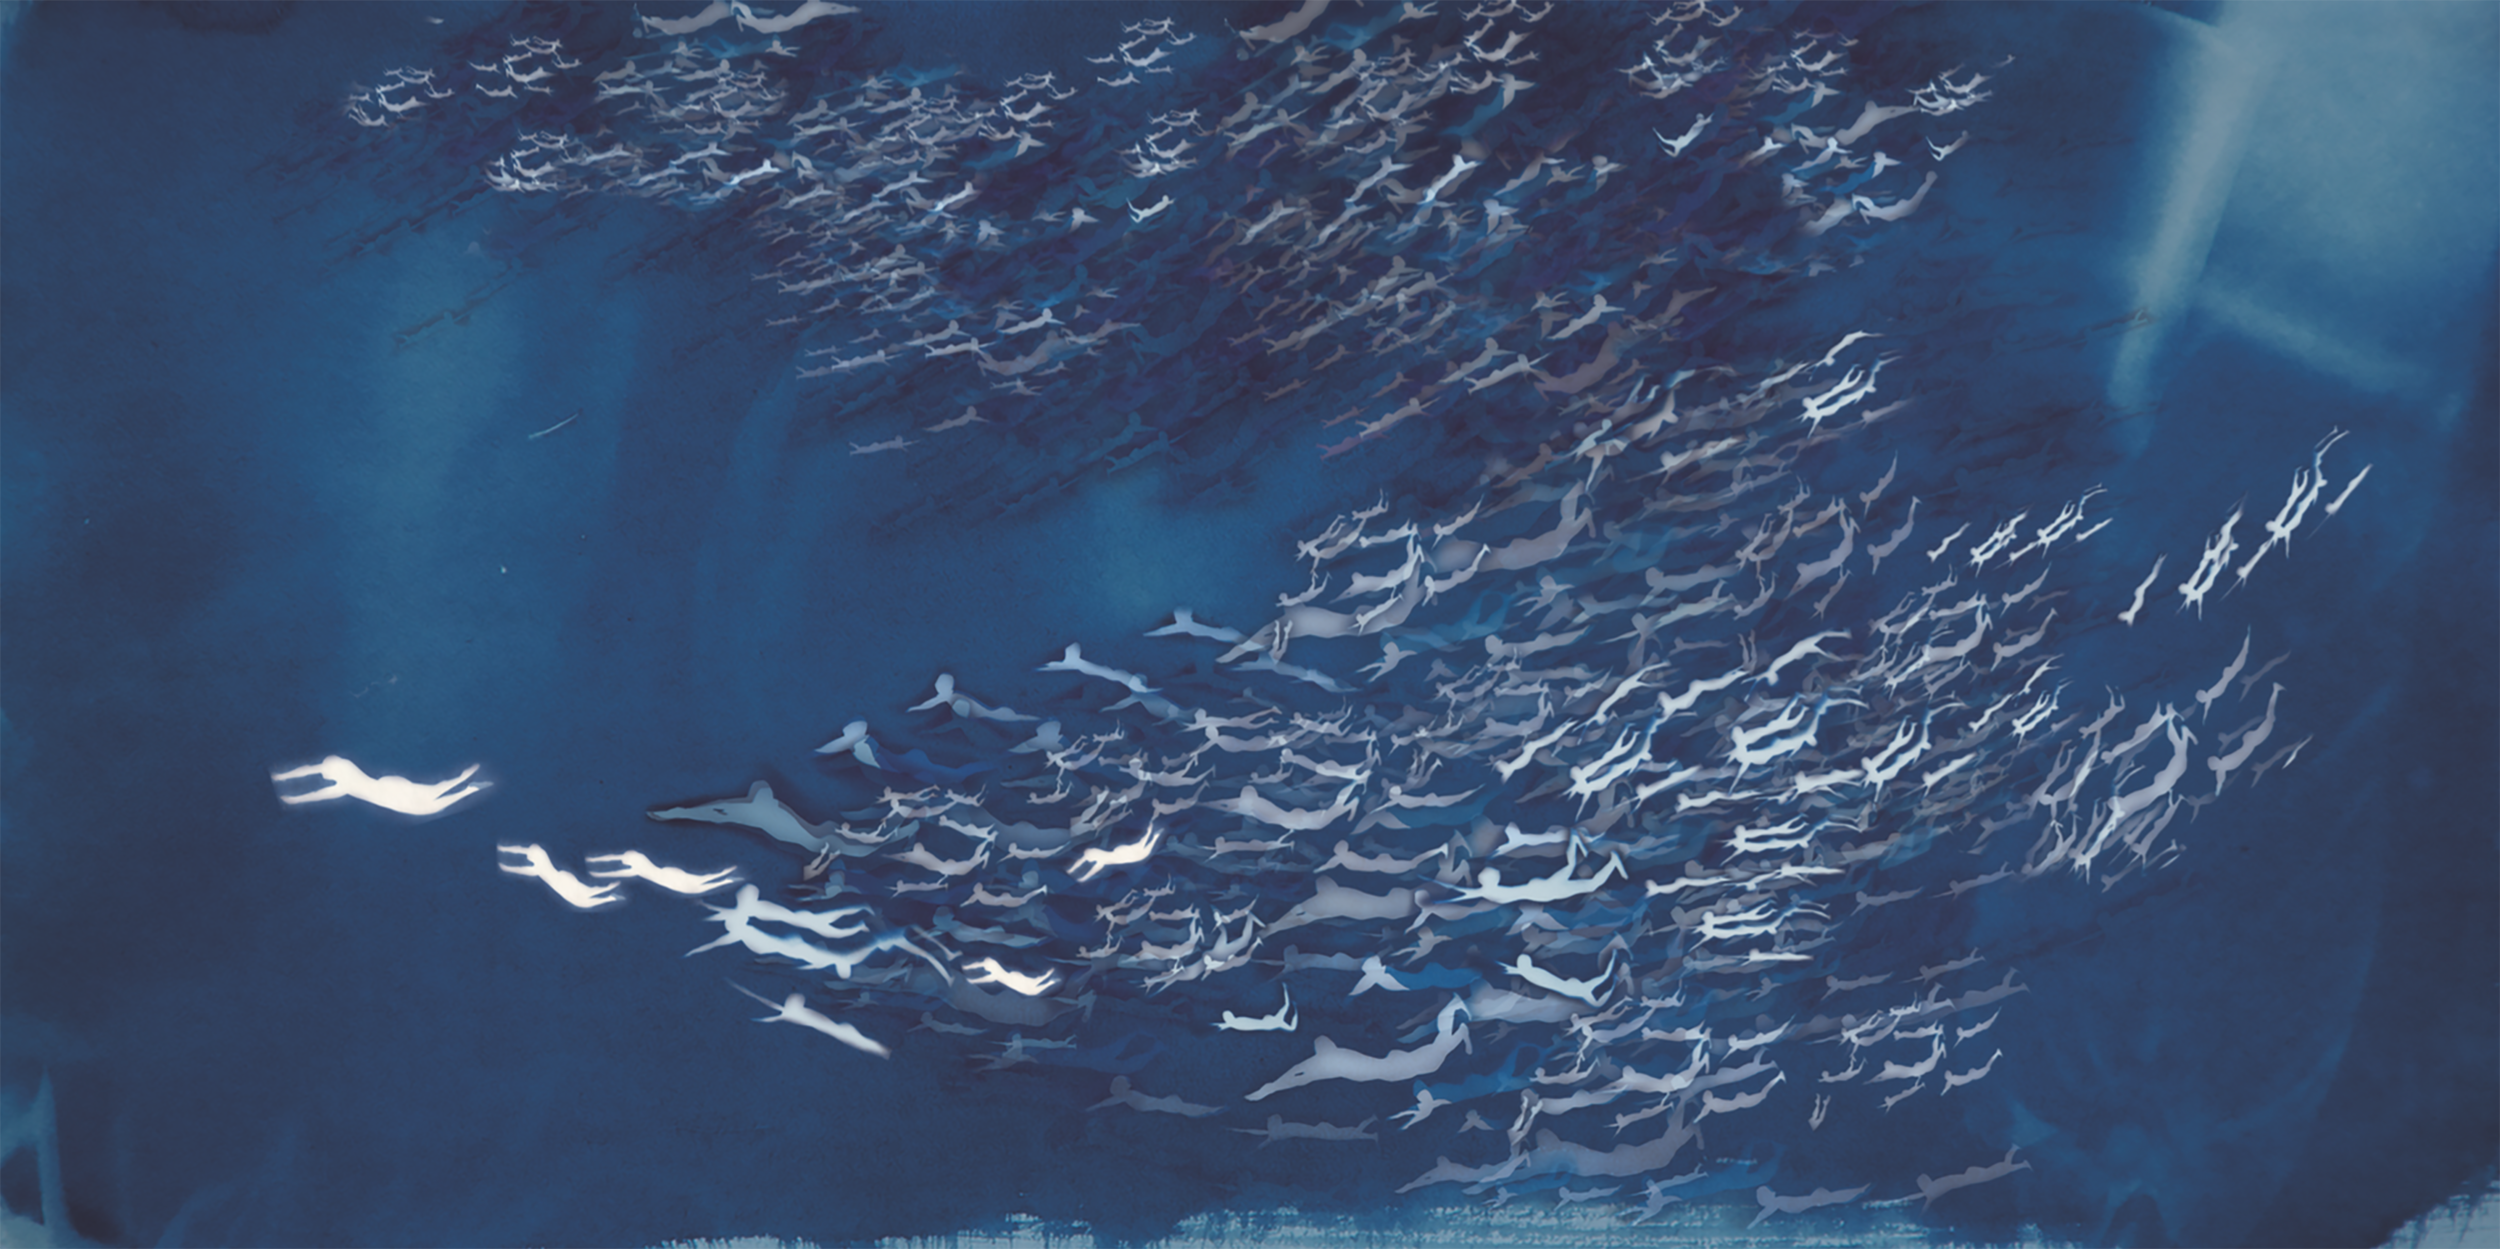  Han Qin,  The Age of Migration 1 , 2018. Cyanotype, watercolor, inkjet print on silk, 28 x 56 inch ©Han Qin, courtesy Fou Gallery 